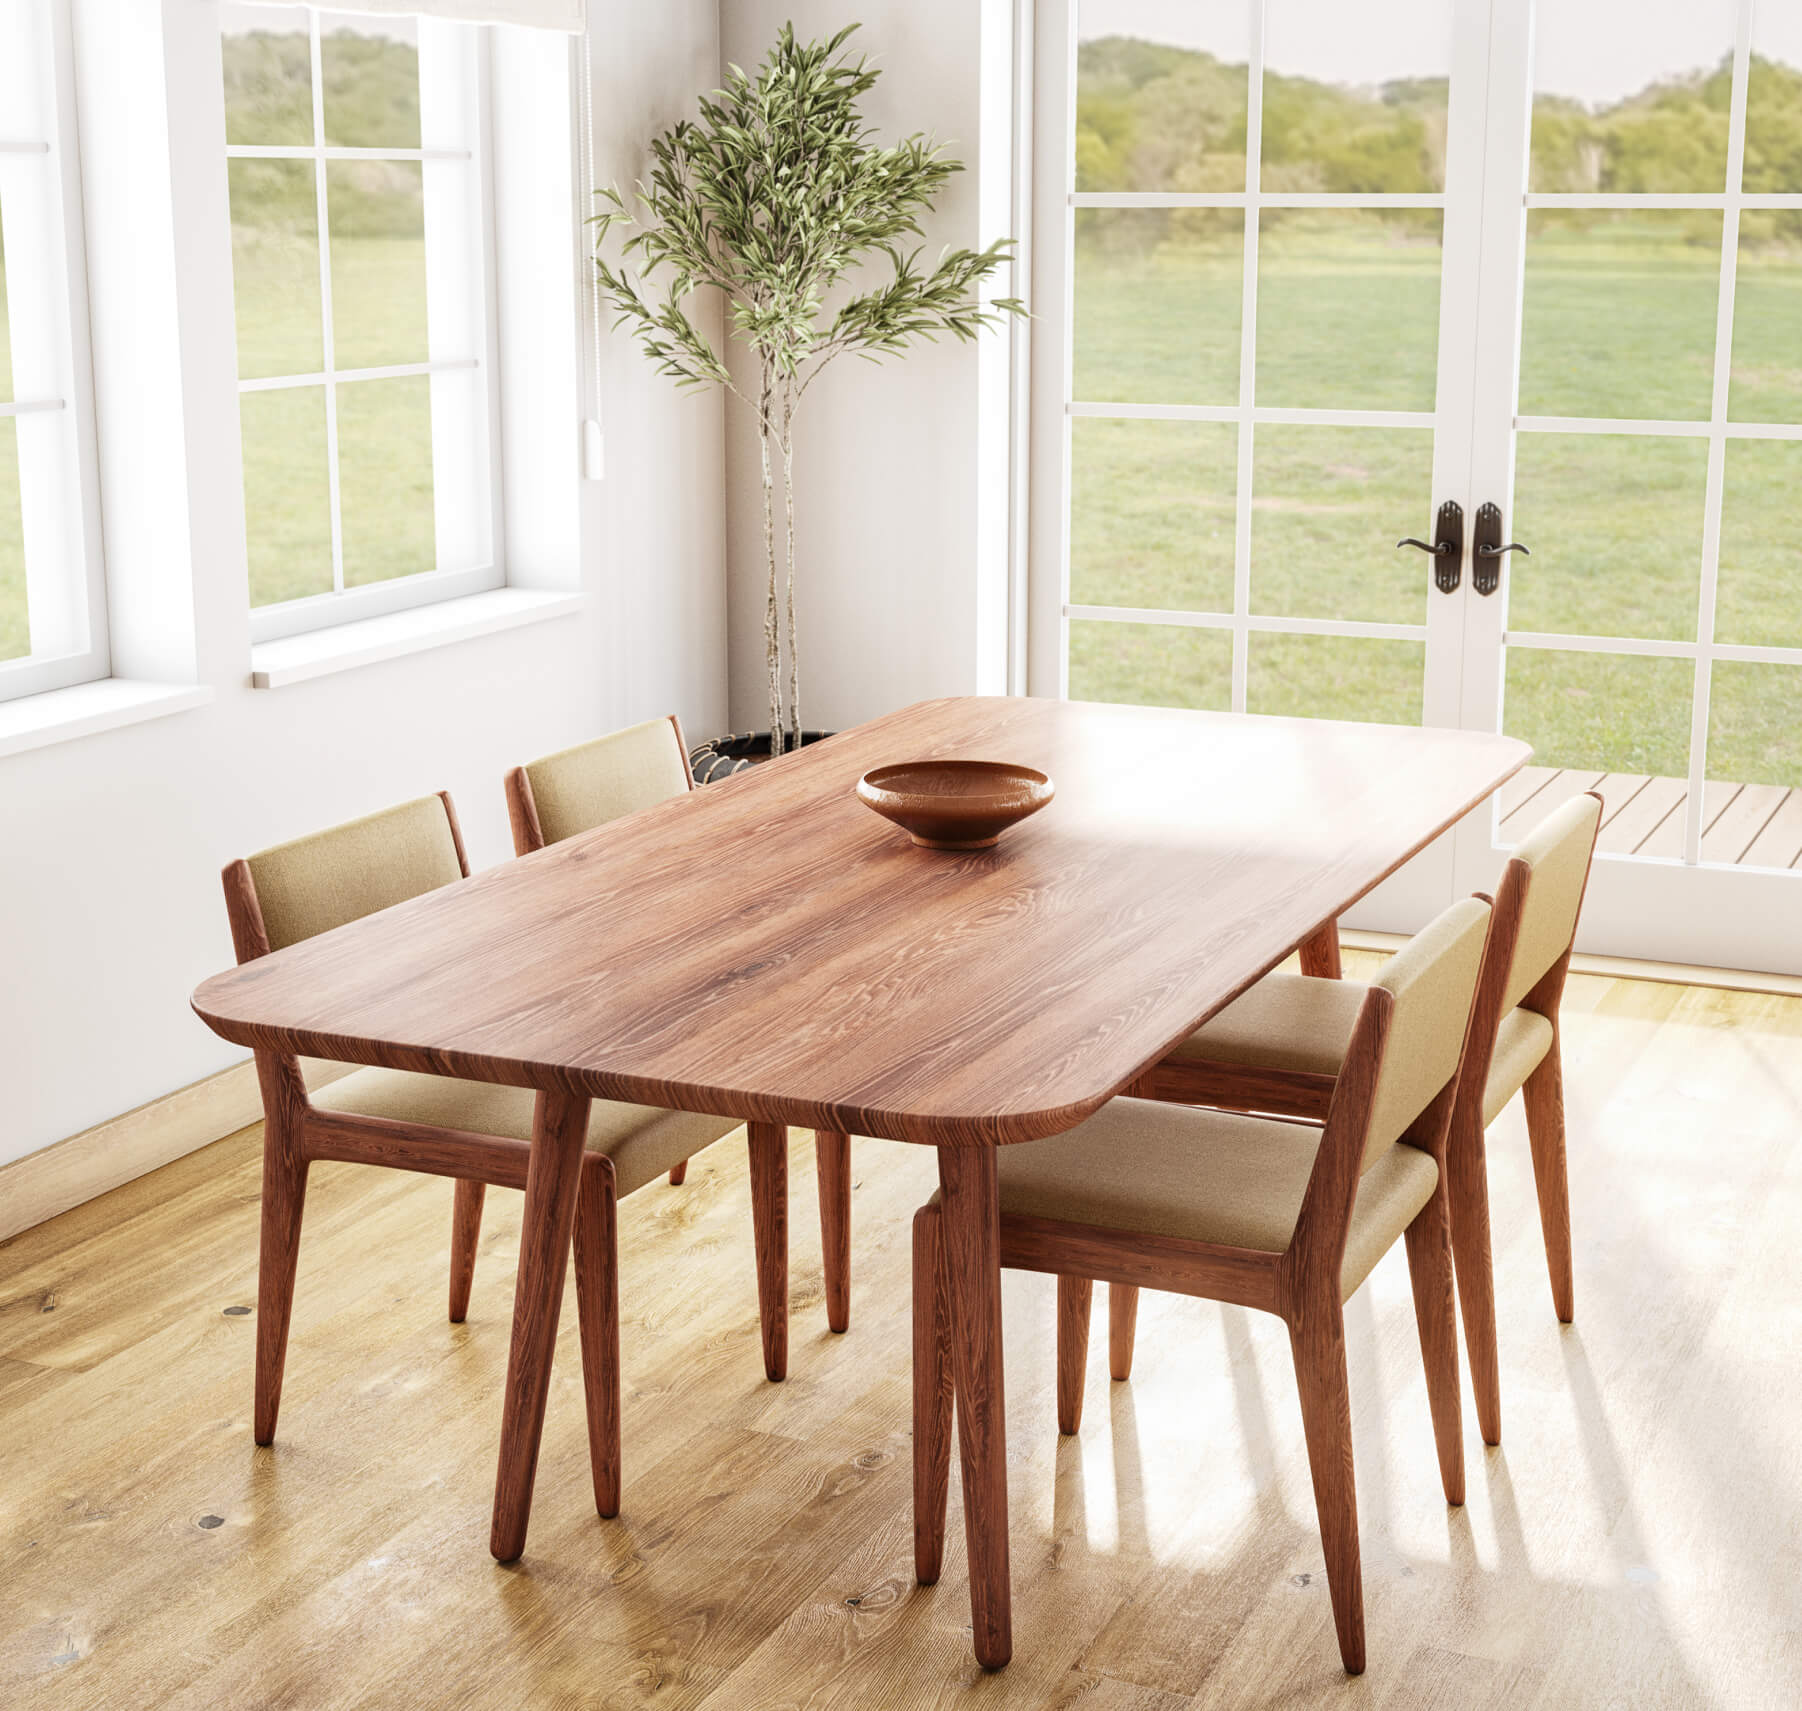 Voya dining table and chairs in walnut